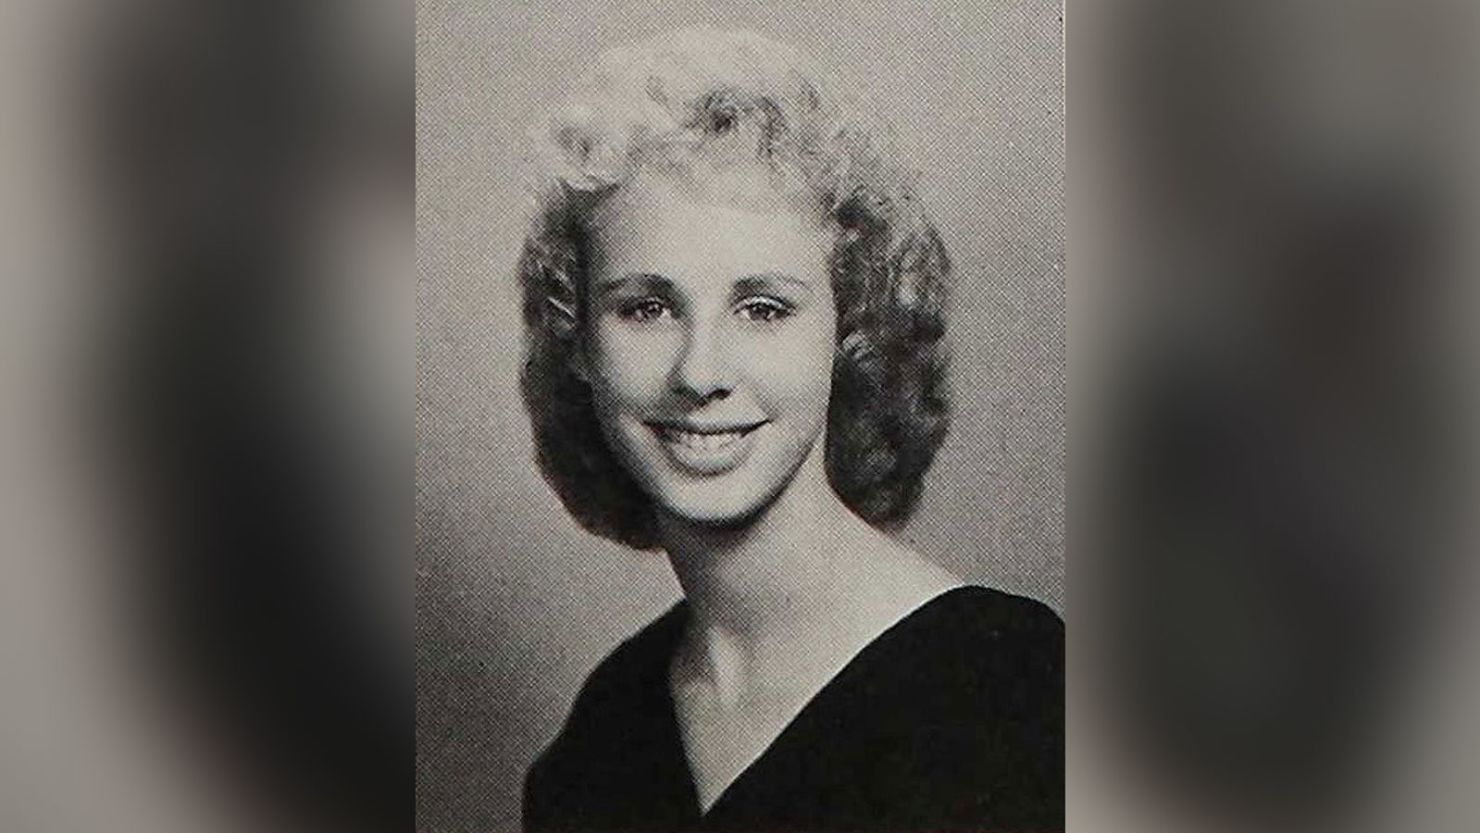 Mary Alice Pultz, who was raised in Maryland, was 25 in 1968 when she was last seen by her family.